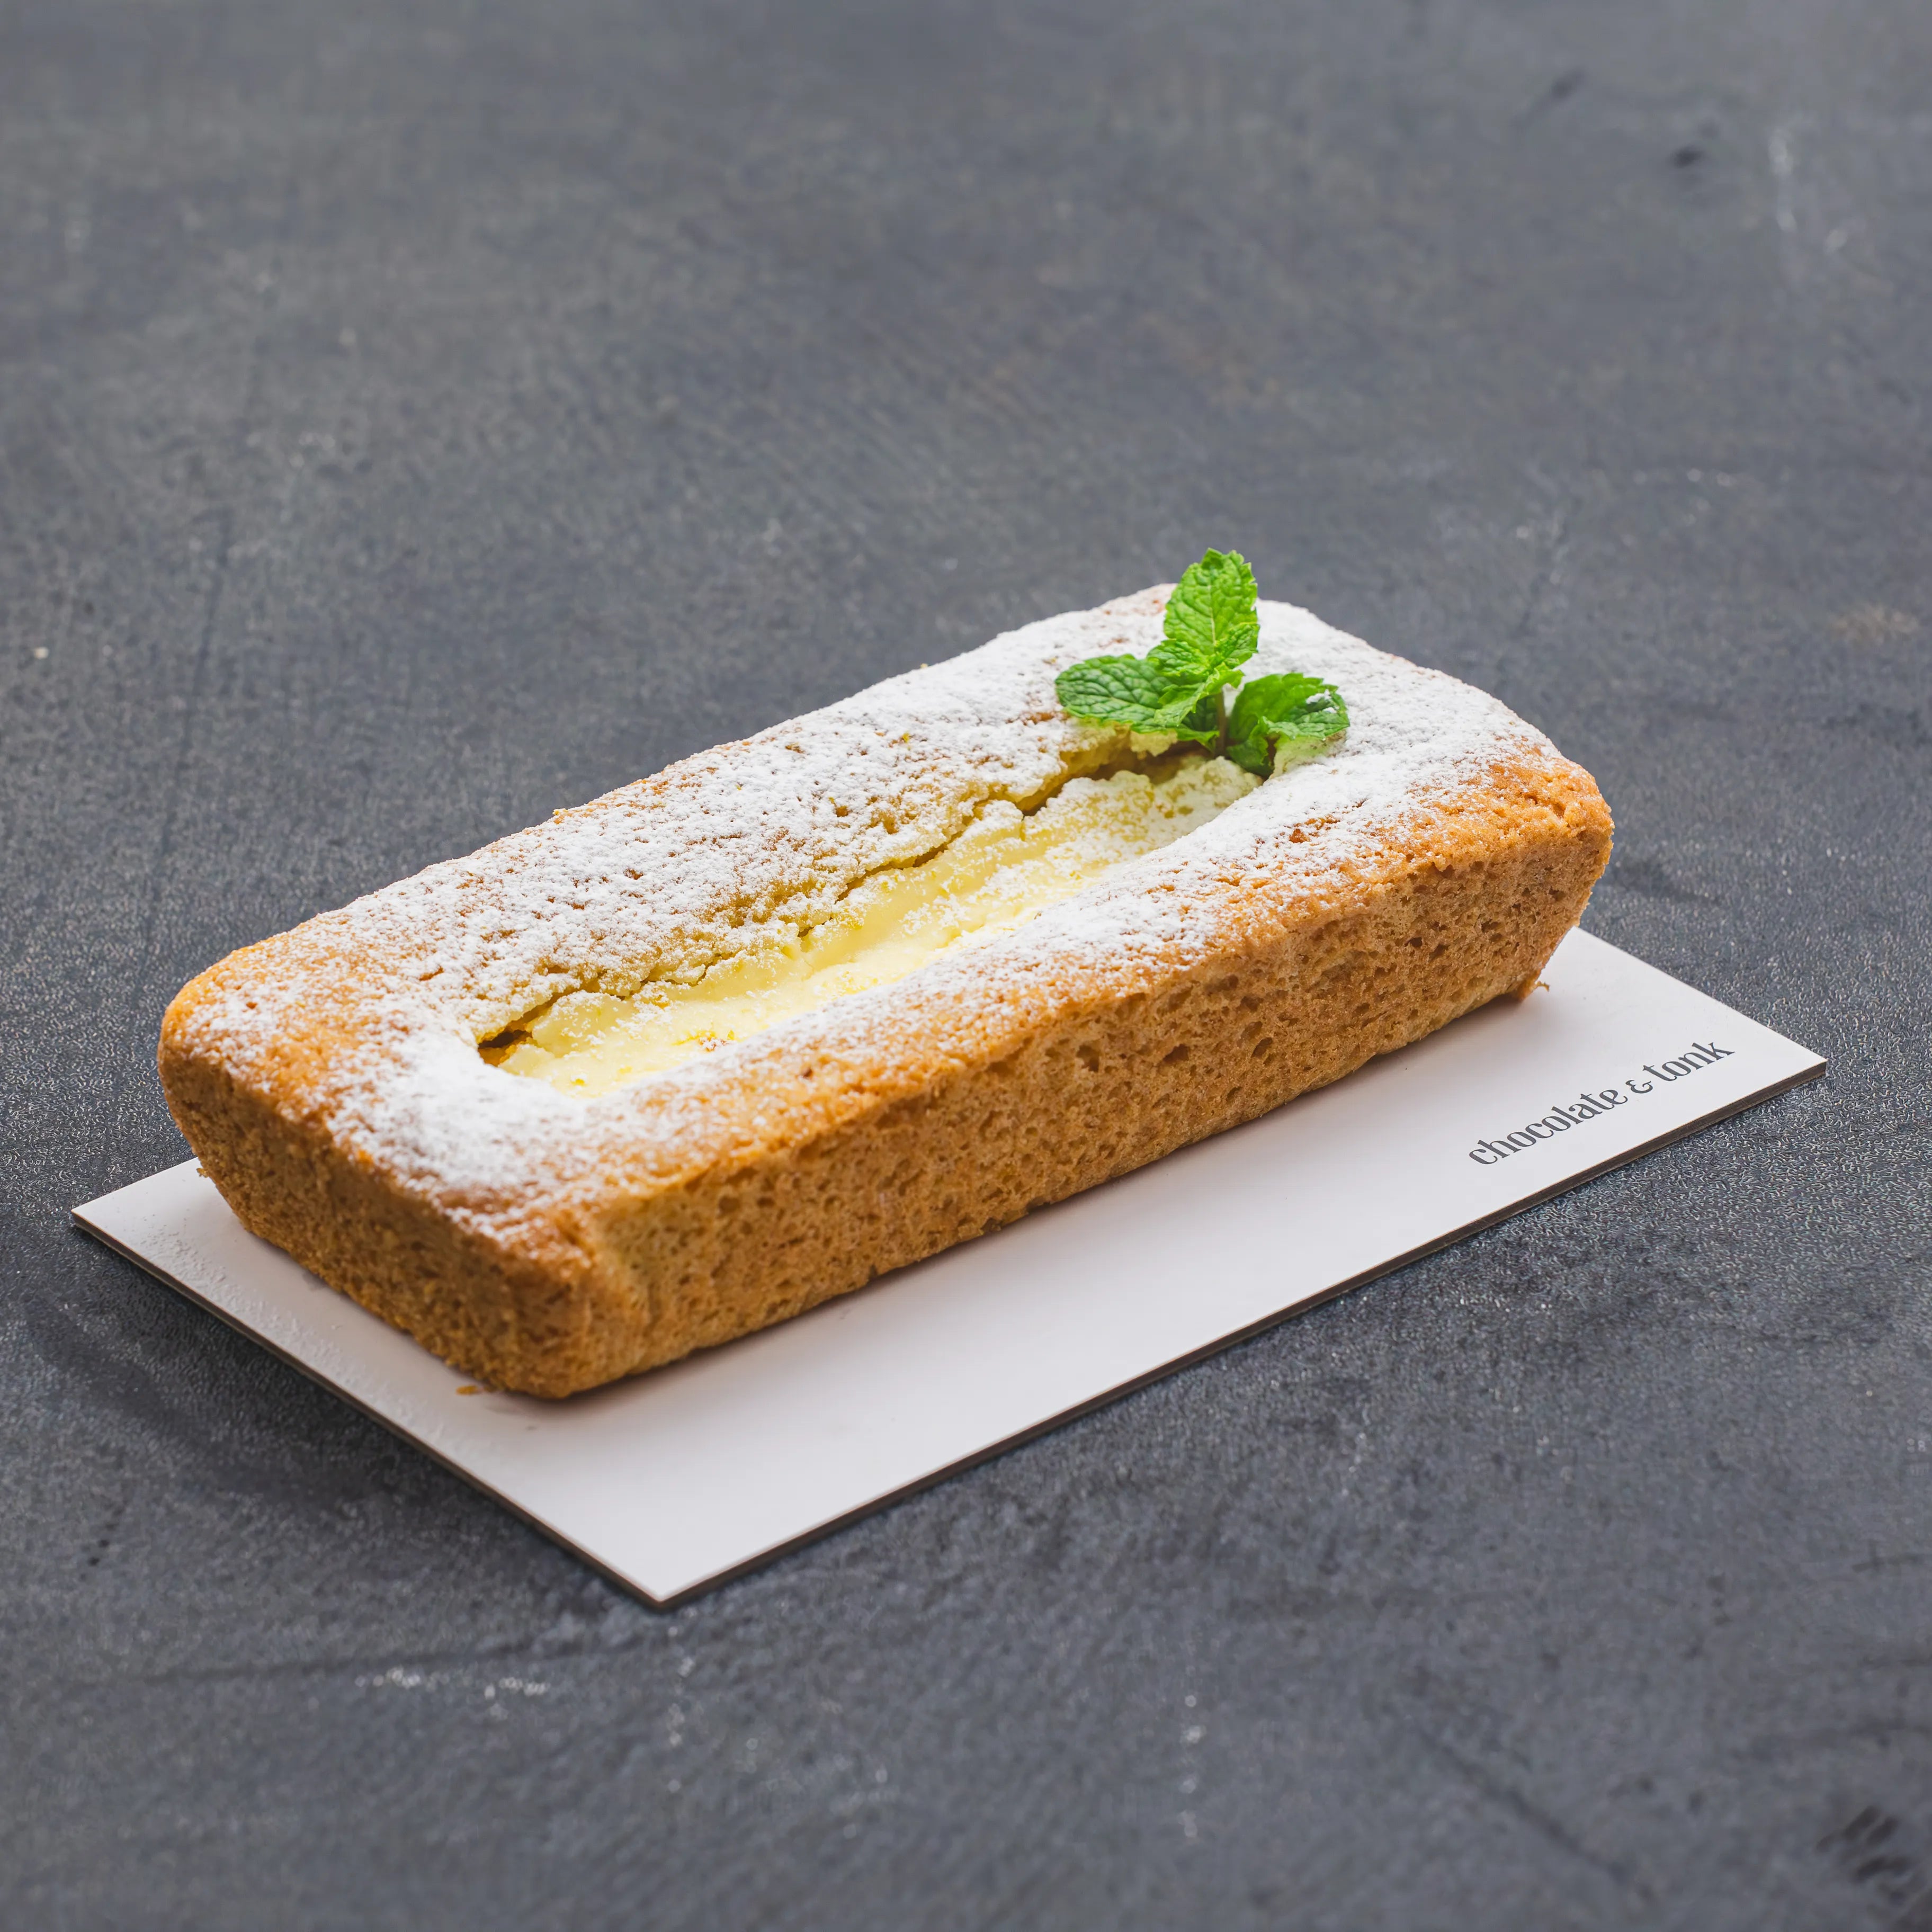 Zesty lemon loaf with a lemon cream cheese filling